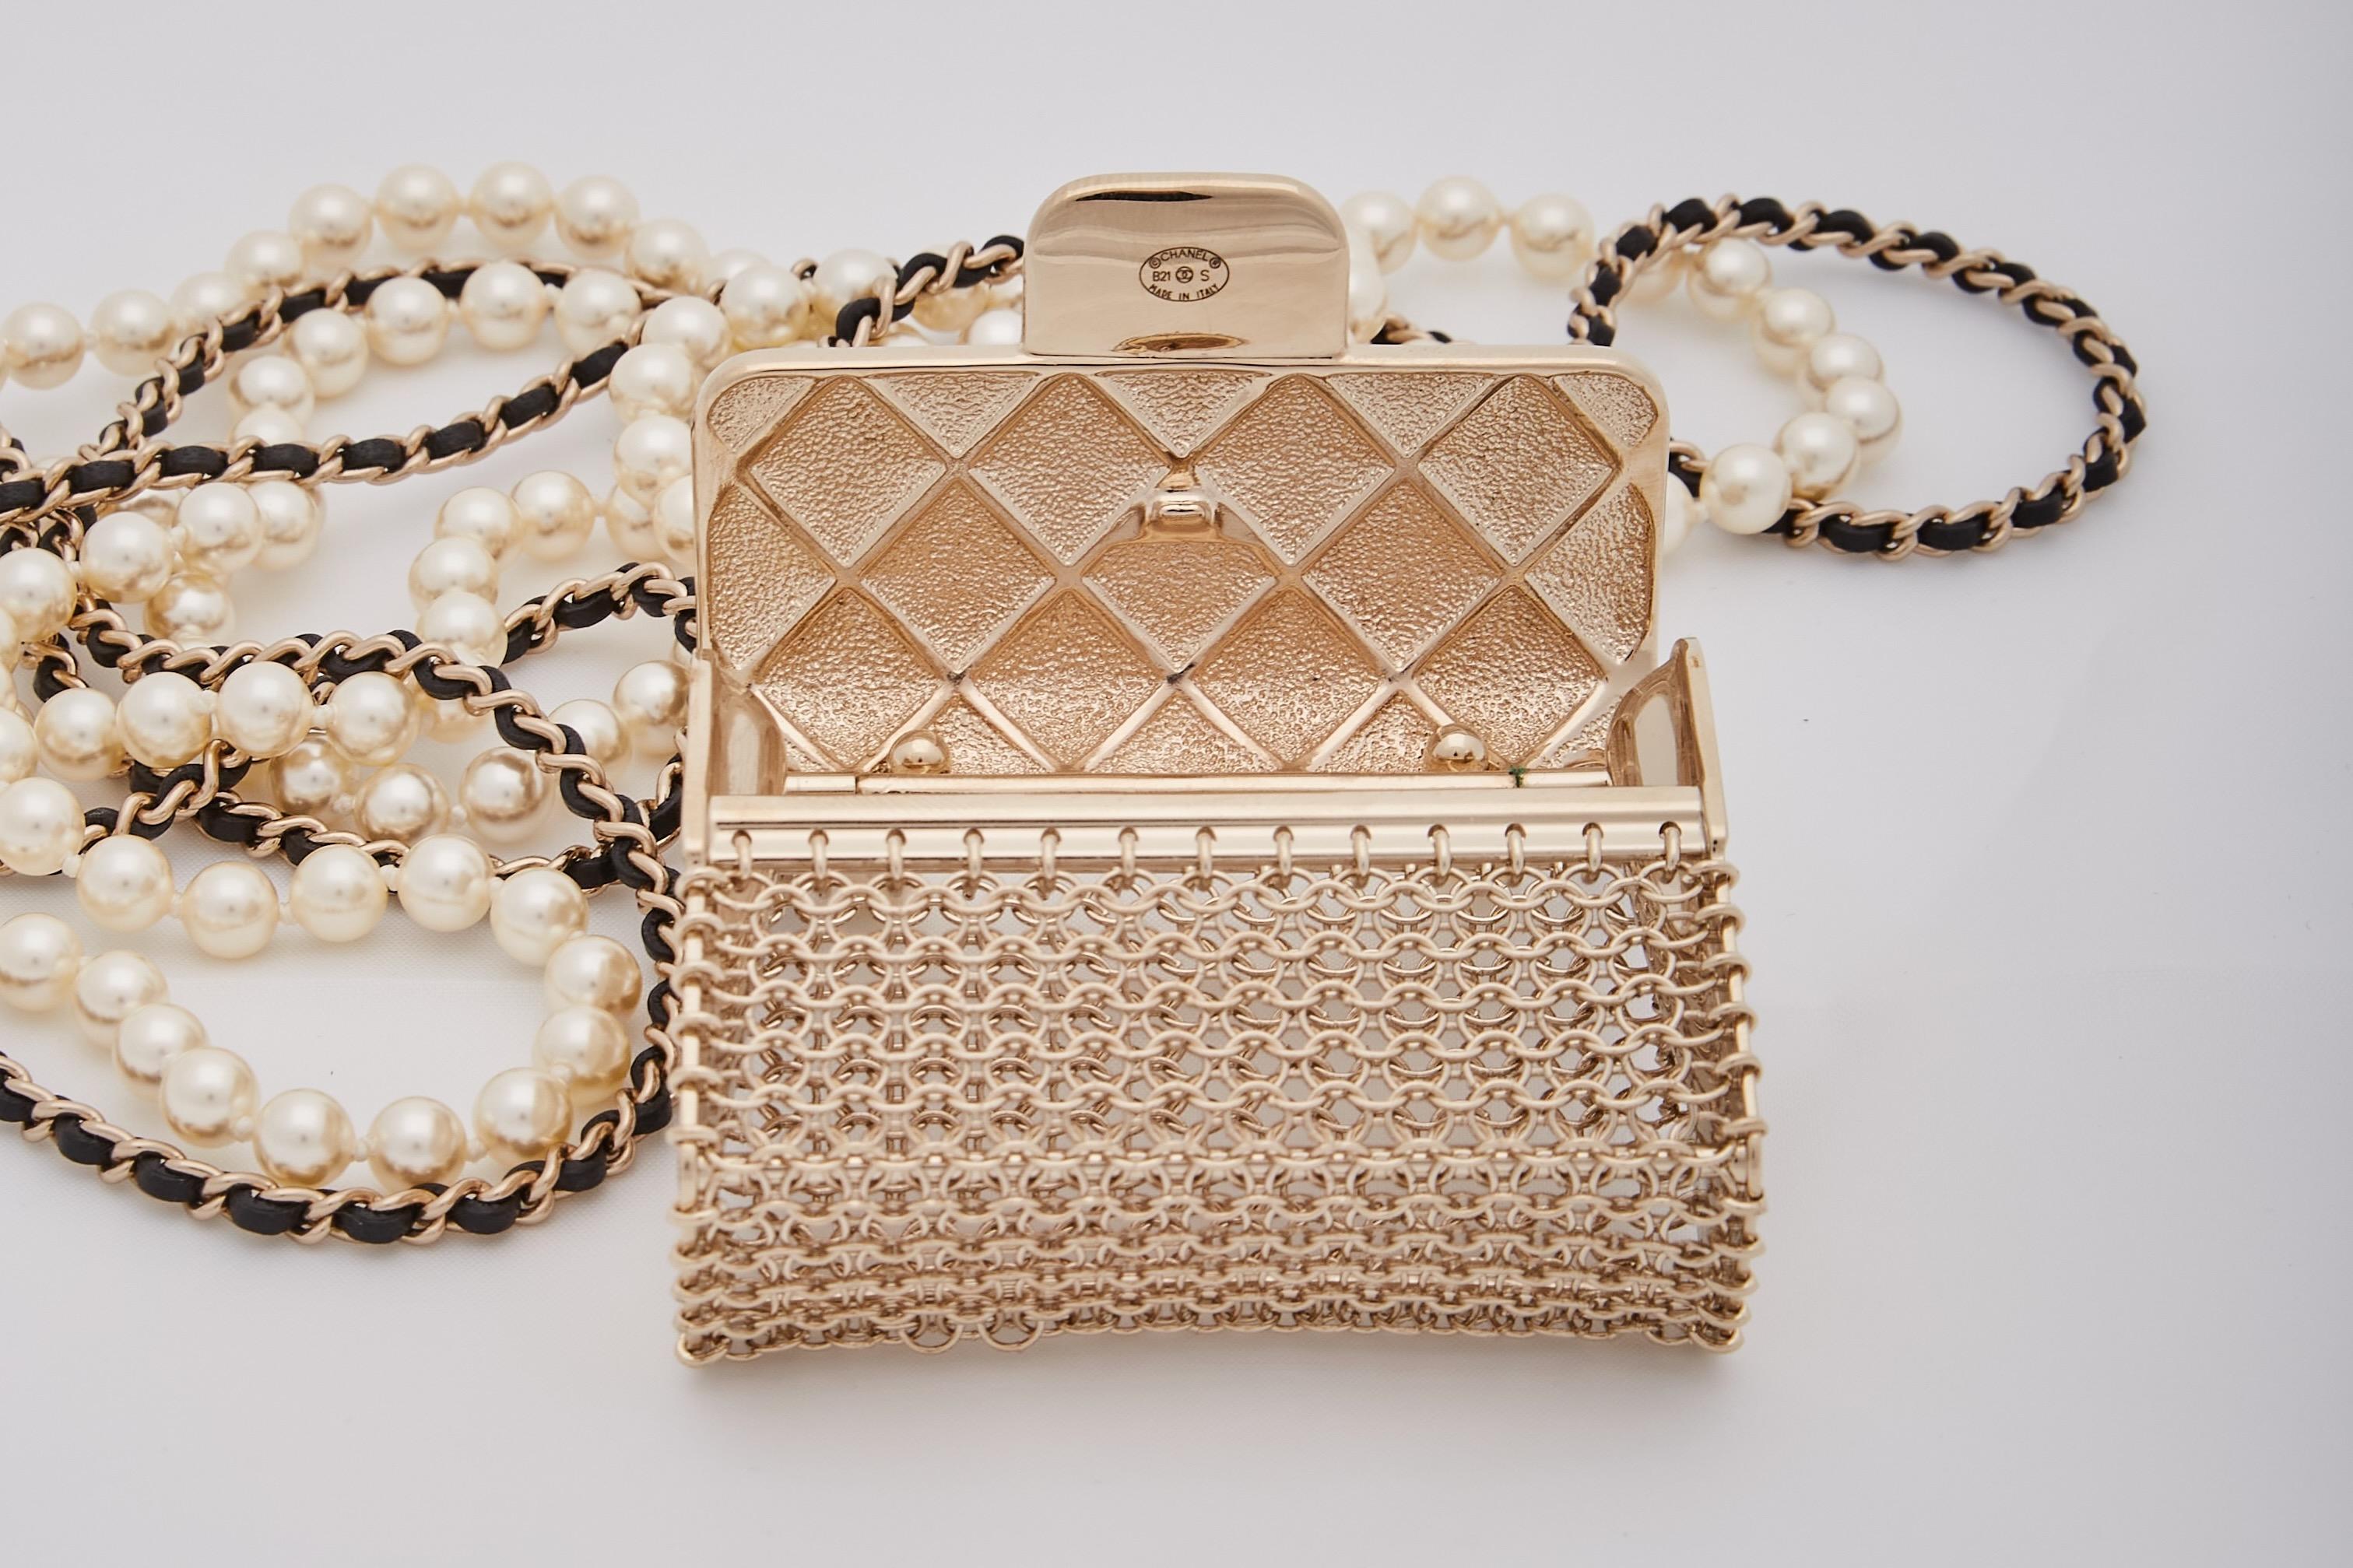 Chanel Gold Micro Flap Bag Pendant Pearls Long Crossbody Necklace For Sale 5